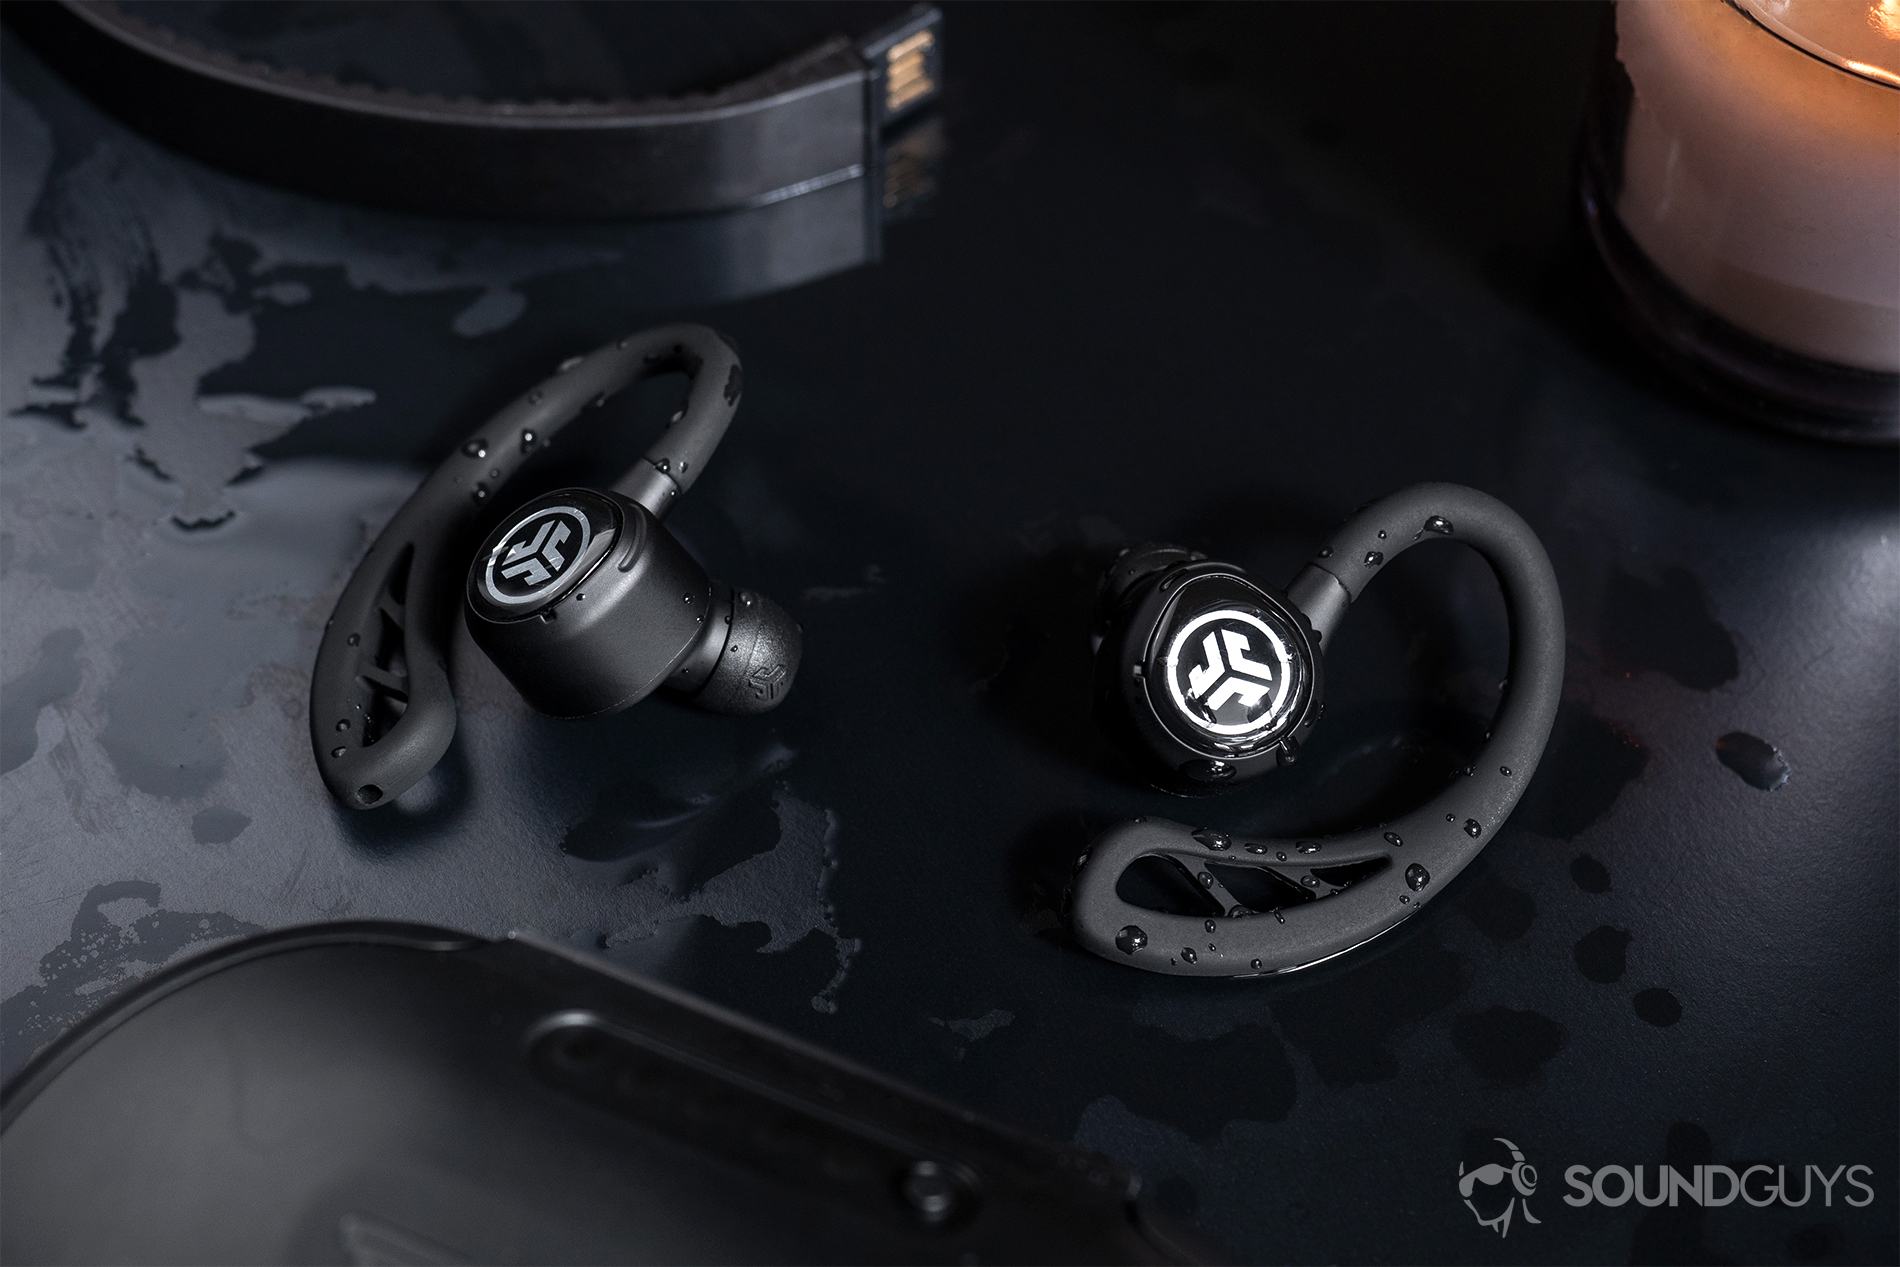 JLab Epic Air Elite: The earbuds surrounded by water on a black table.